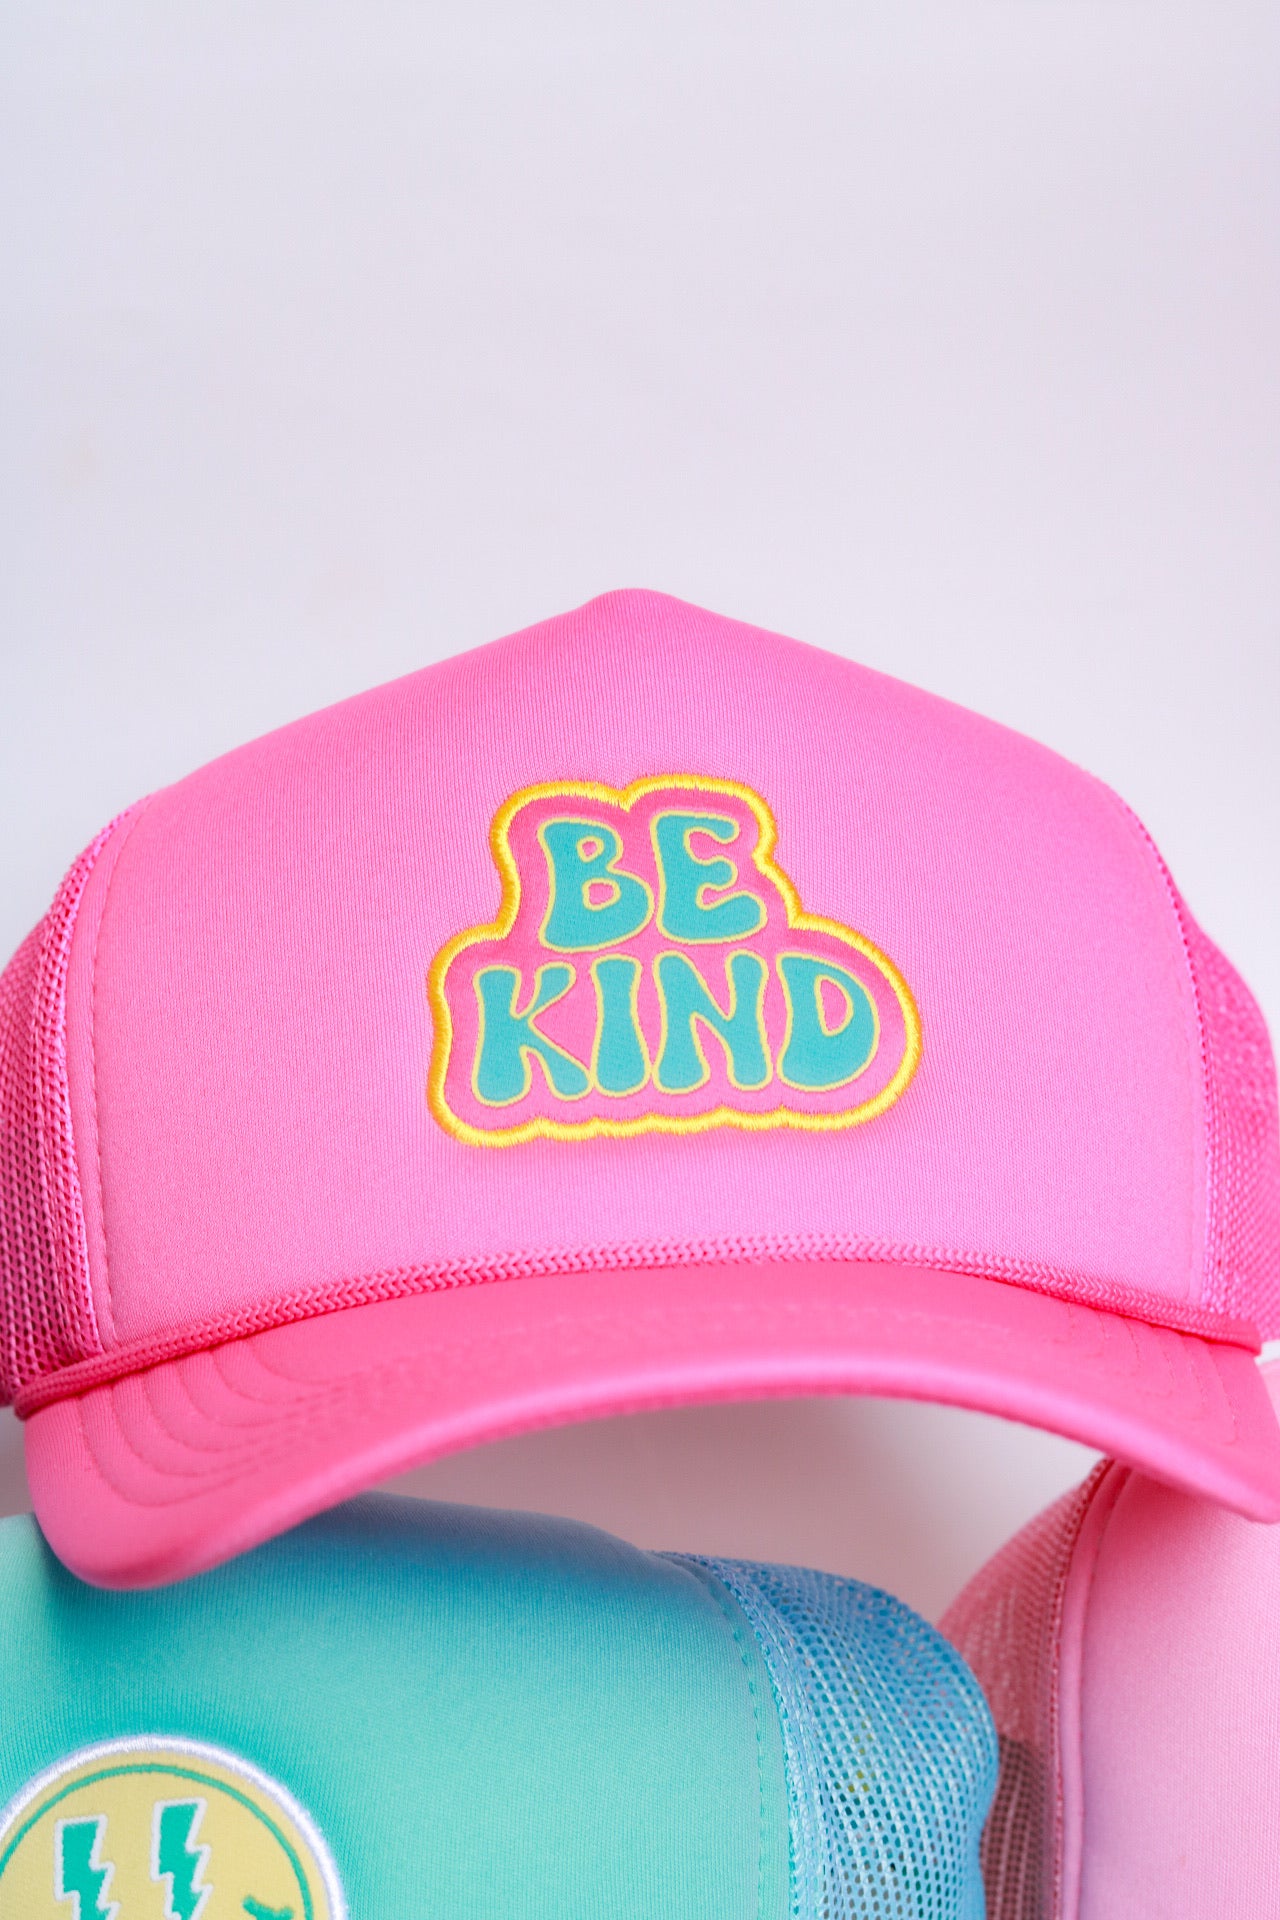 XOXO by magpies | Watermelon Be Kind Trucker